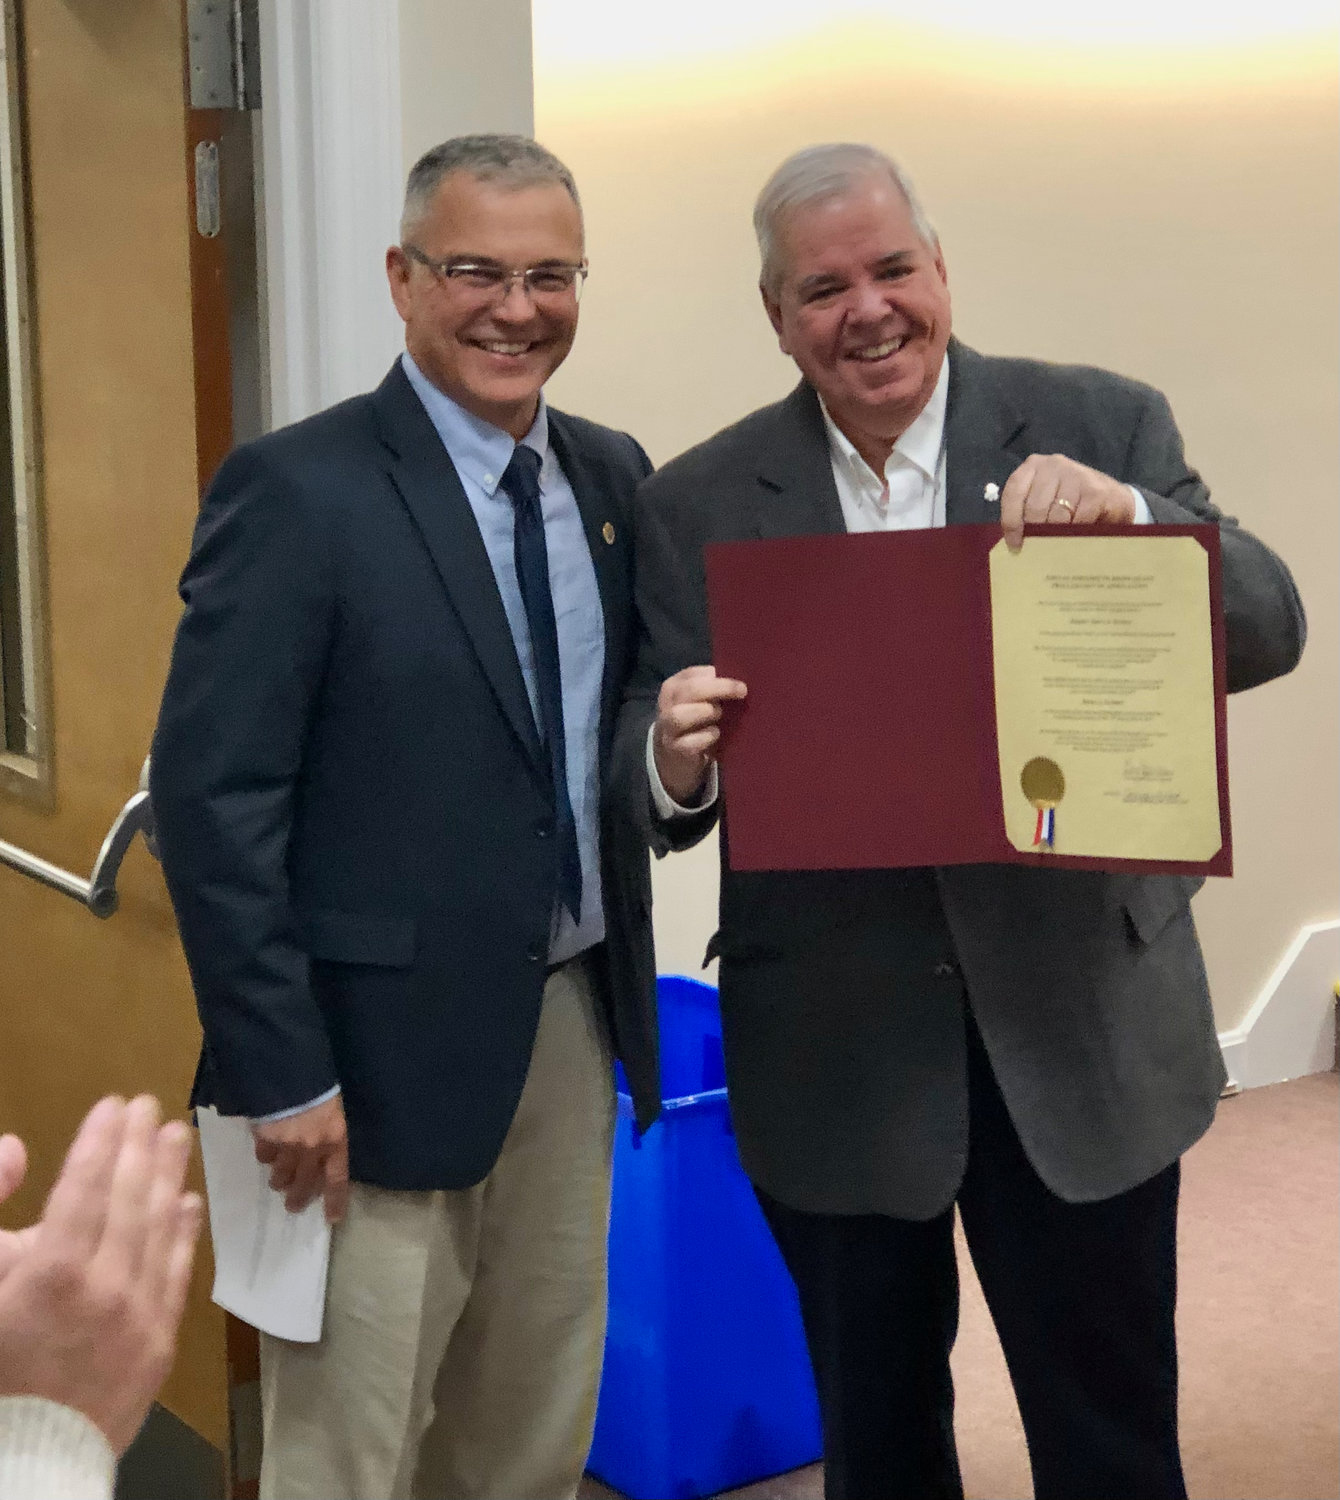 Former R.I. Sen. James Seveney shows off the proclamation that Town Council President Kevin Aguiar (left) had just presented to him during a brief ceremony at Monday night’s meeting. Seveney is also a former council president.